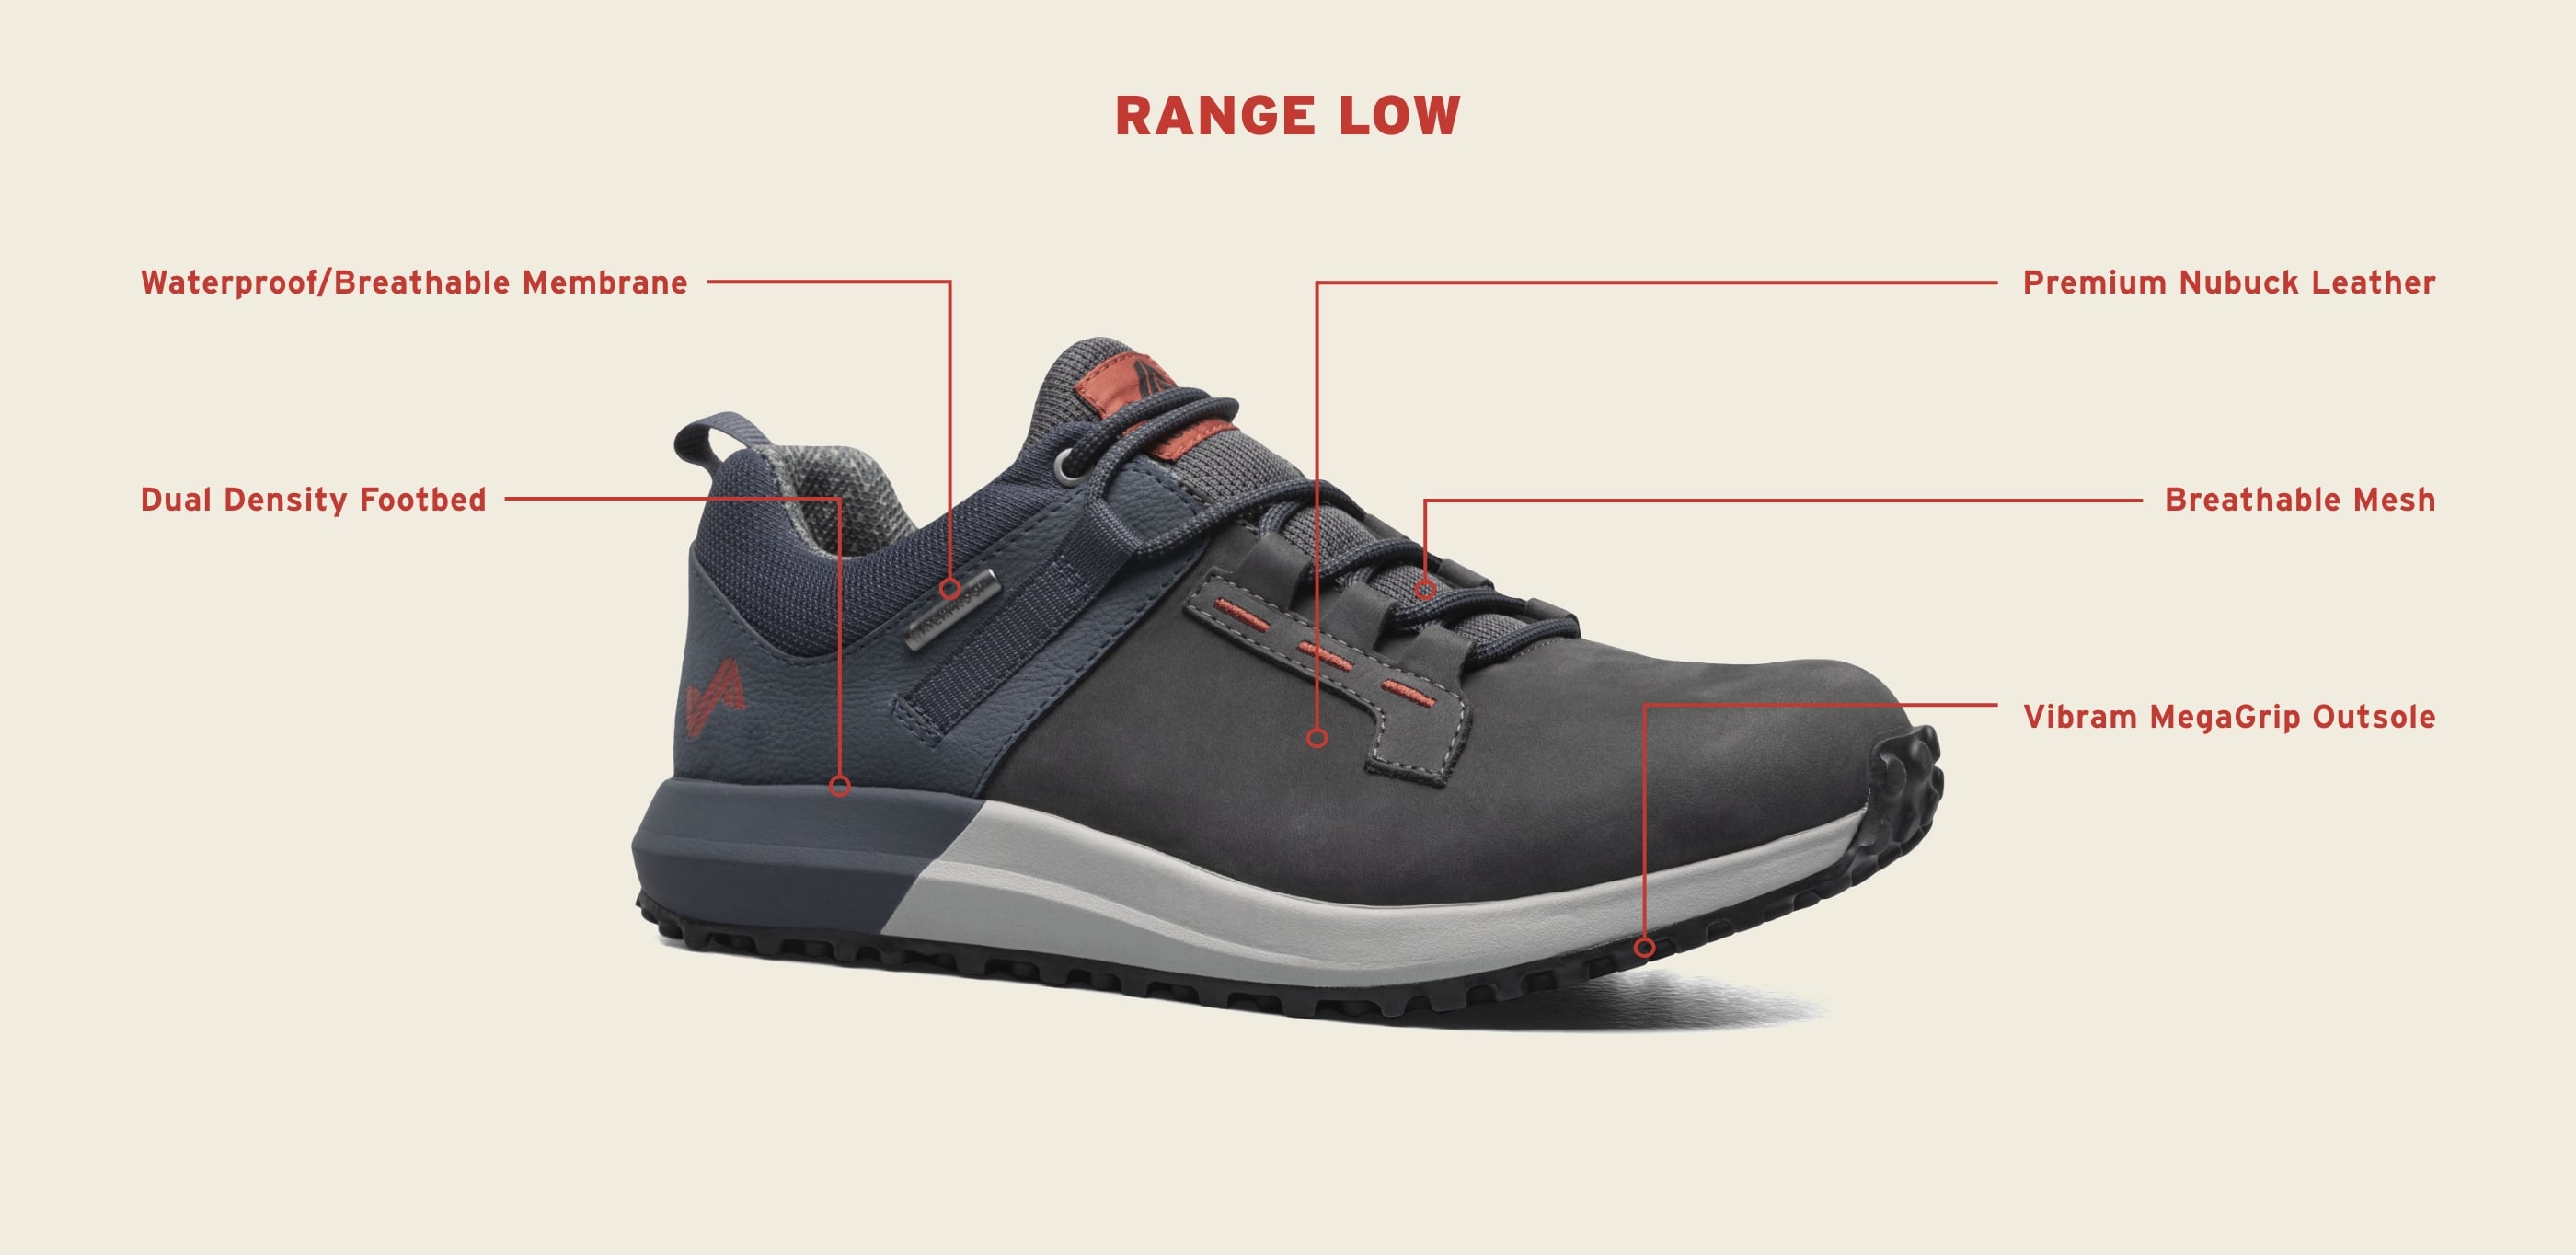 Click to shop the Range Low. Image features the tech callouts for this style.